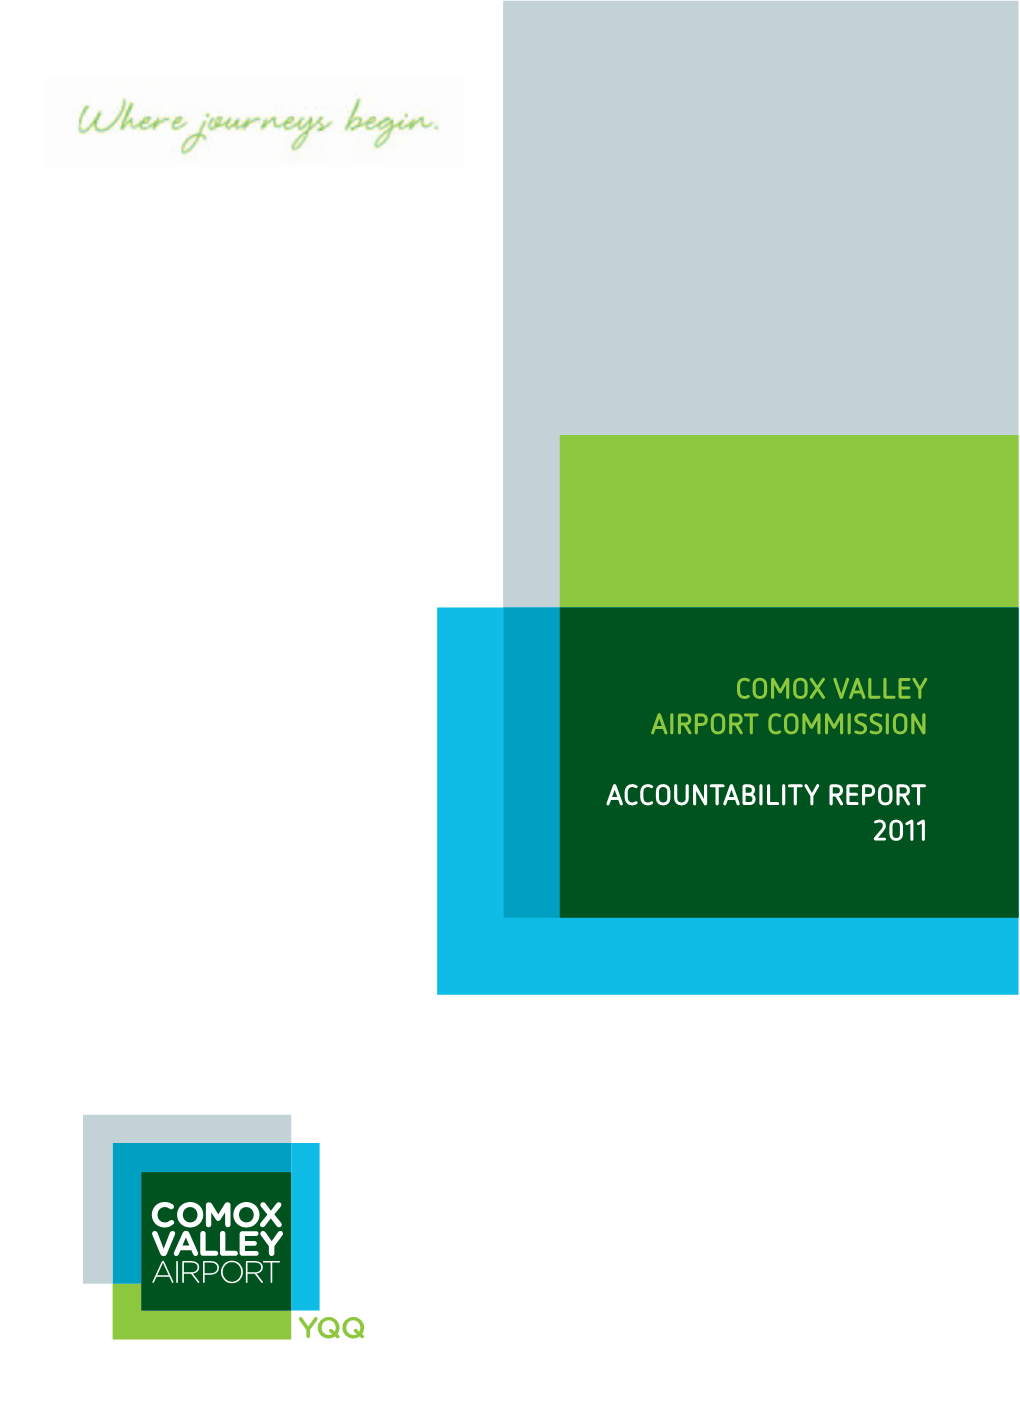 Comox Valley Airport Commission Accountability